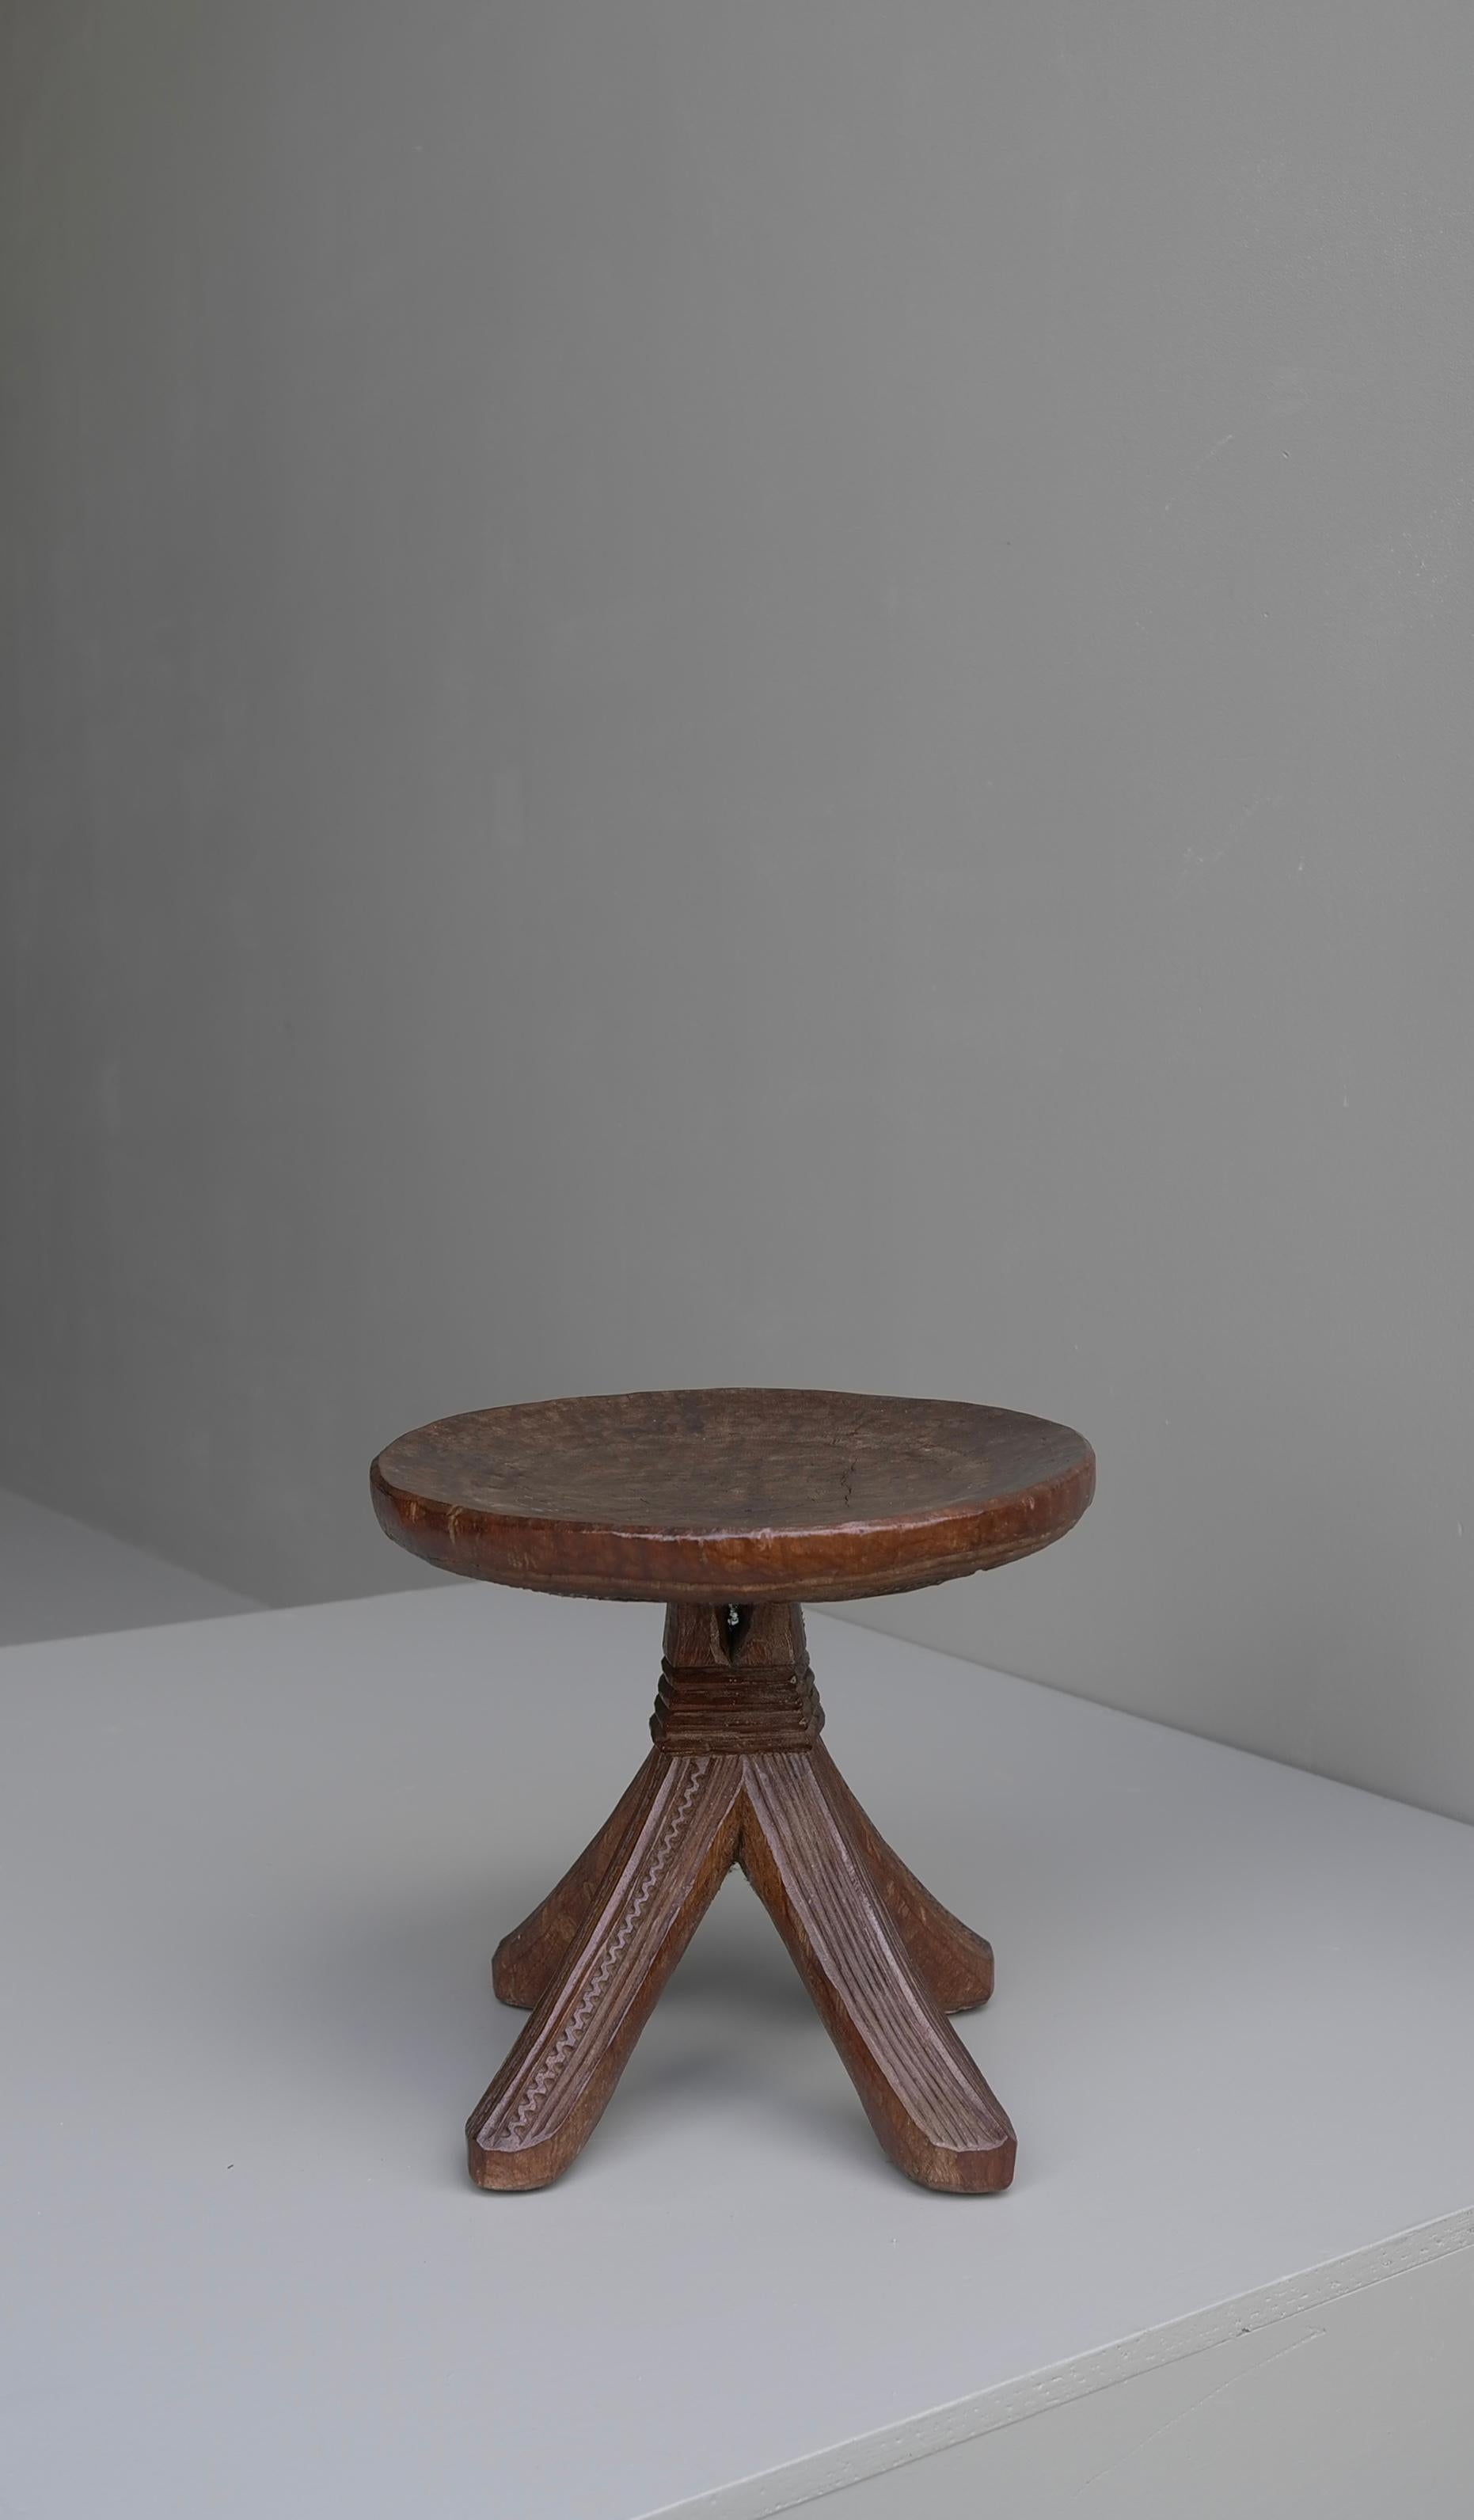 Wood Handcrafted African Tribal Art Craftsmanship Stool, Mid-Century Modern, 1950's For Sale